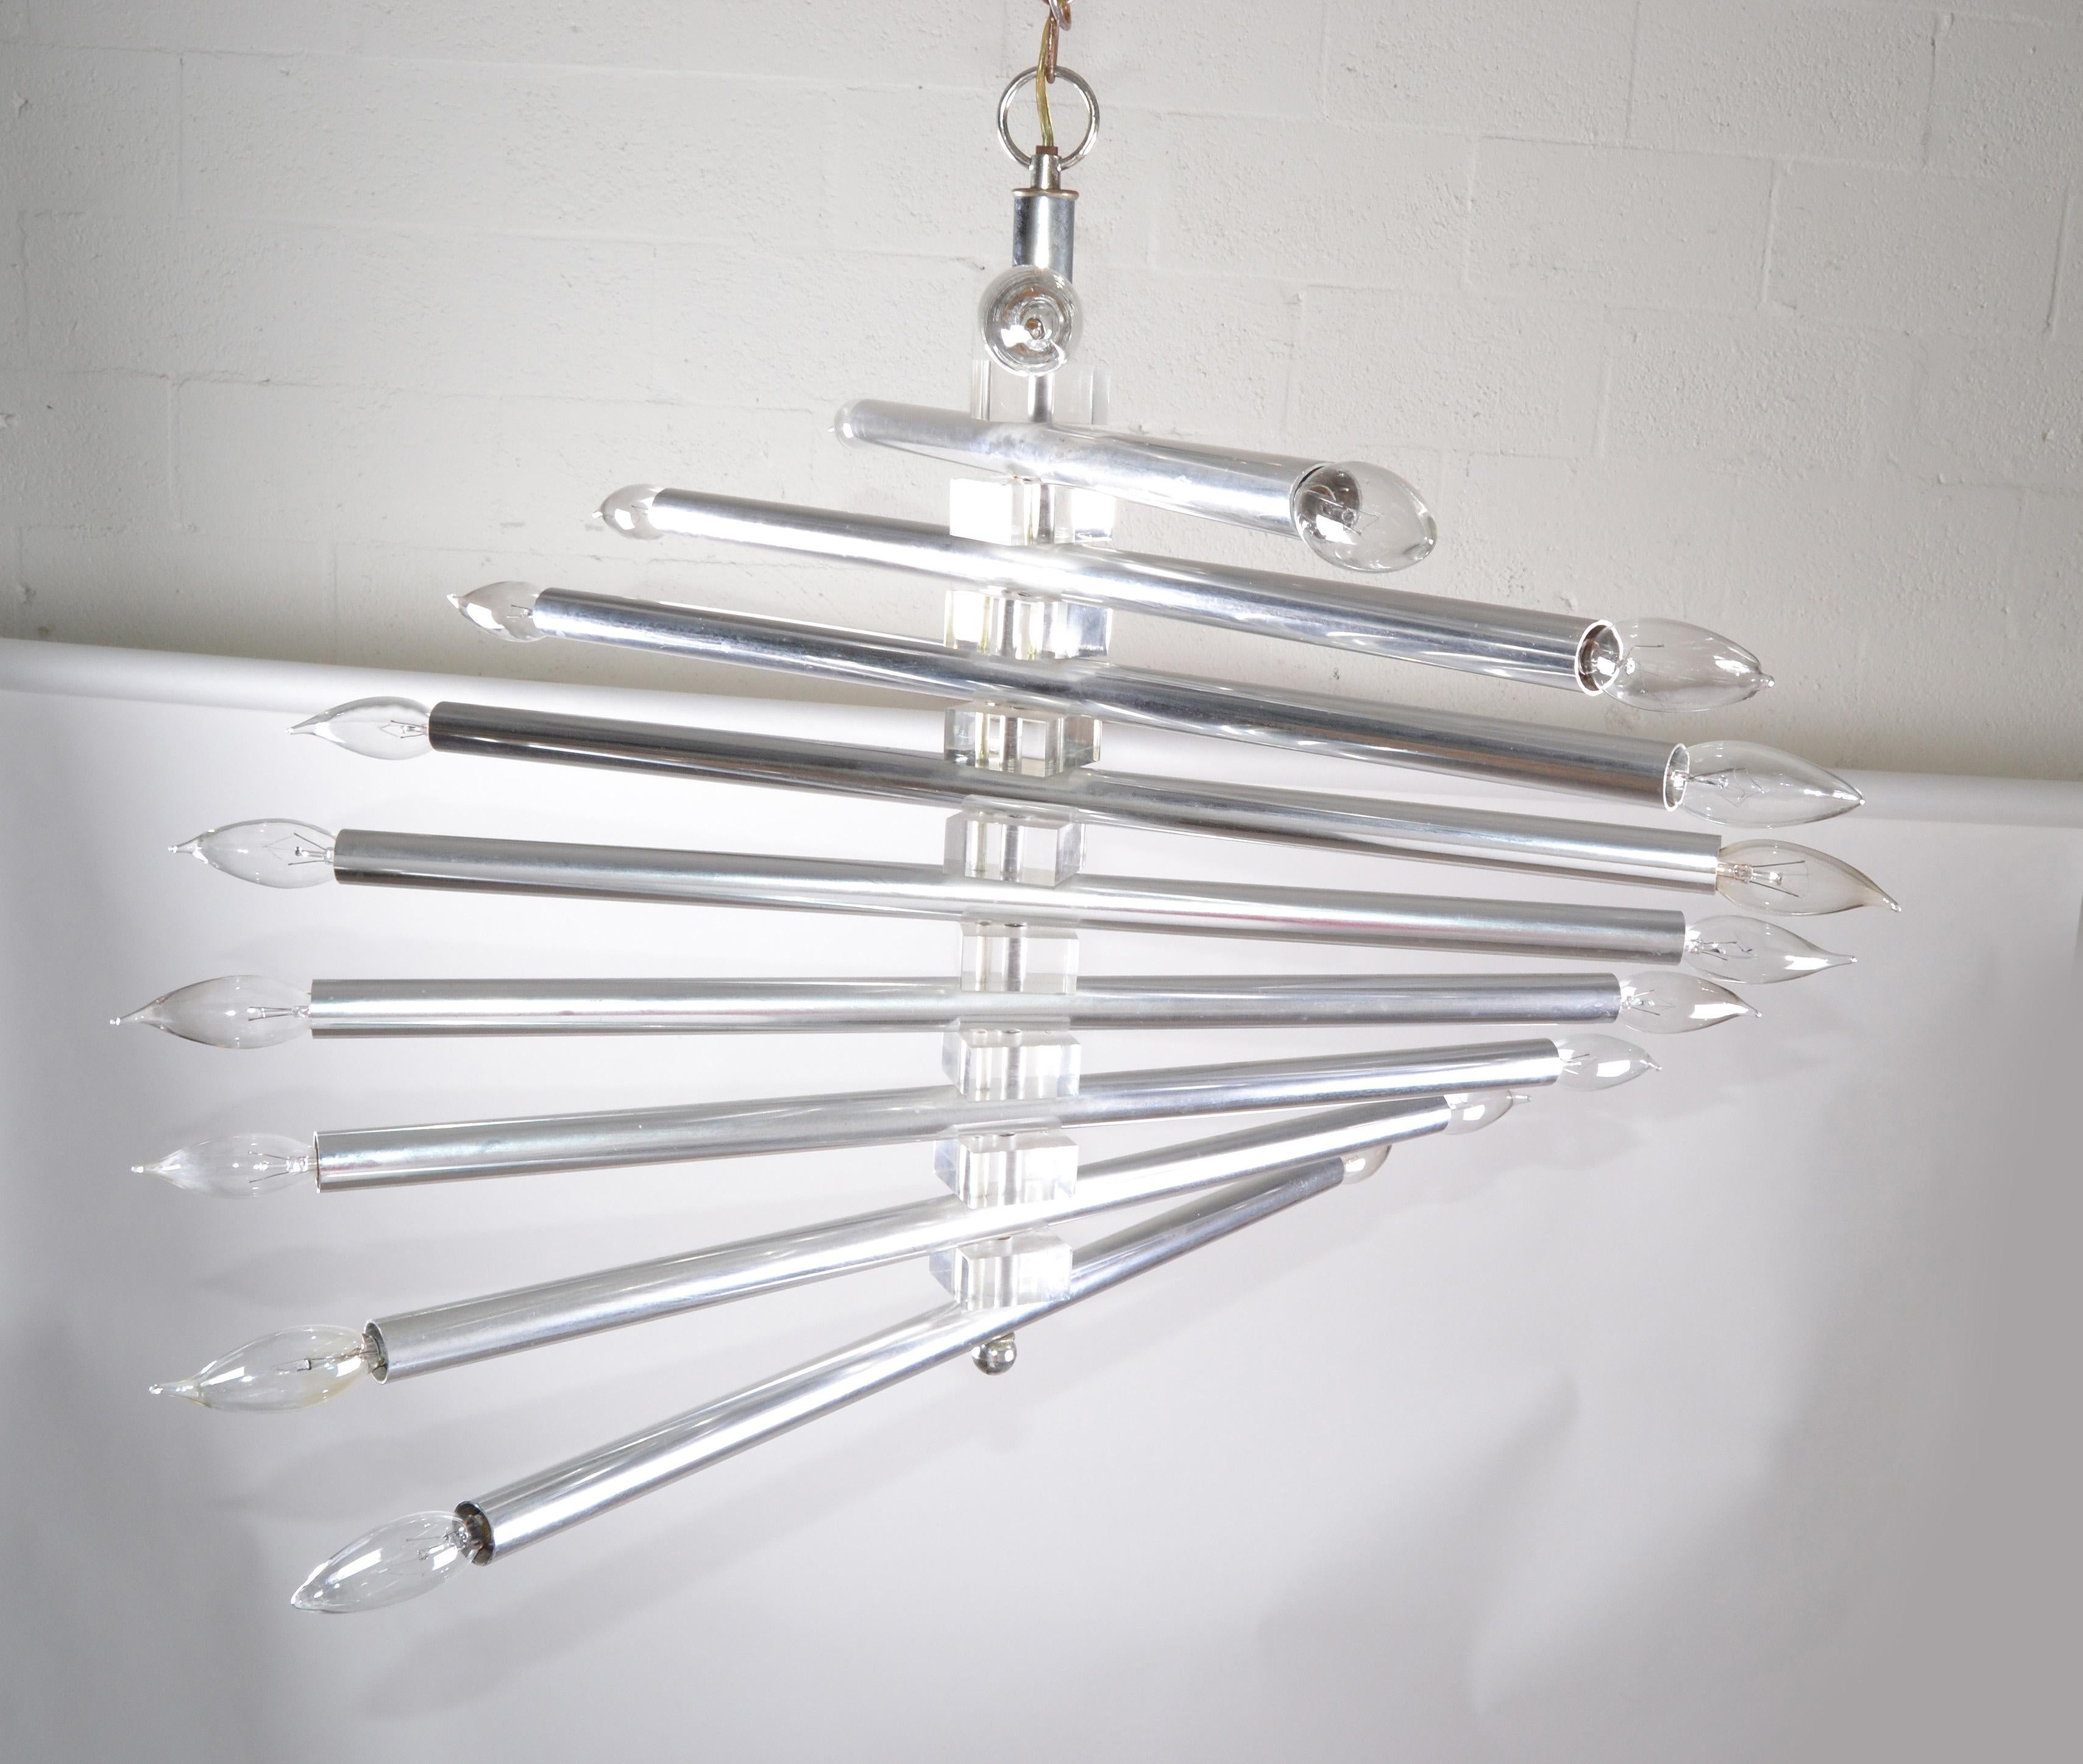 Italian Mid-Century Modern Gaetano Sciolari chrome and Lucite twenty-light chandelier from the 1970s.
Comes with a 17 inches long chain and canopy.
US rewired and in working condition and takes 24 light bulbs with max 25 watts per bulb.